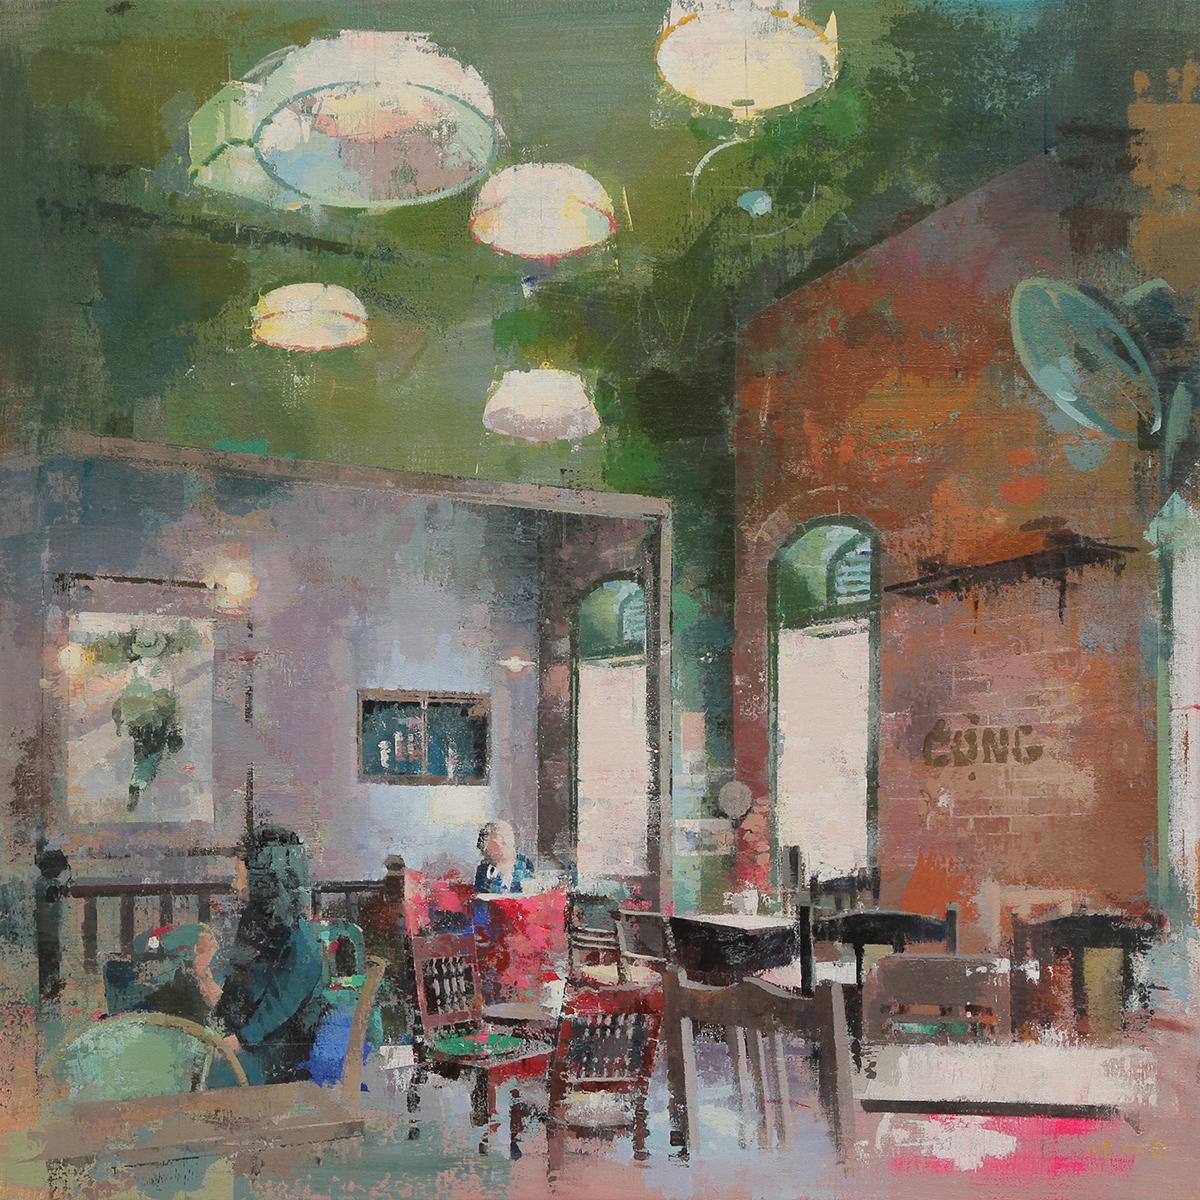 Cong Caphe - Interior Cafe scene, oil and acrylic on canvas